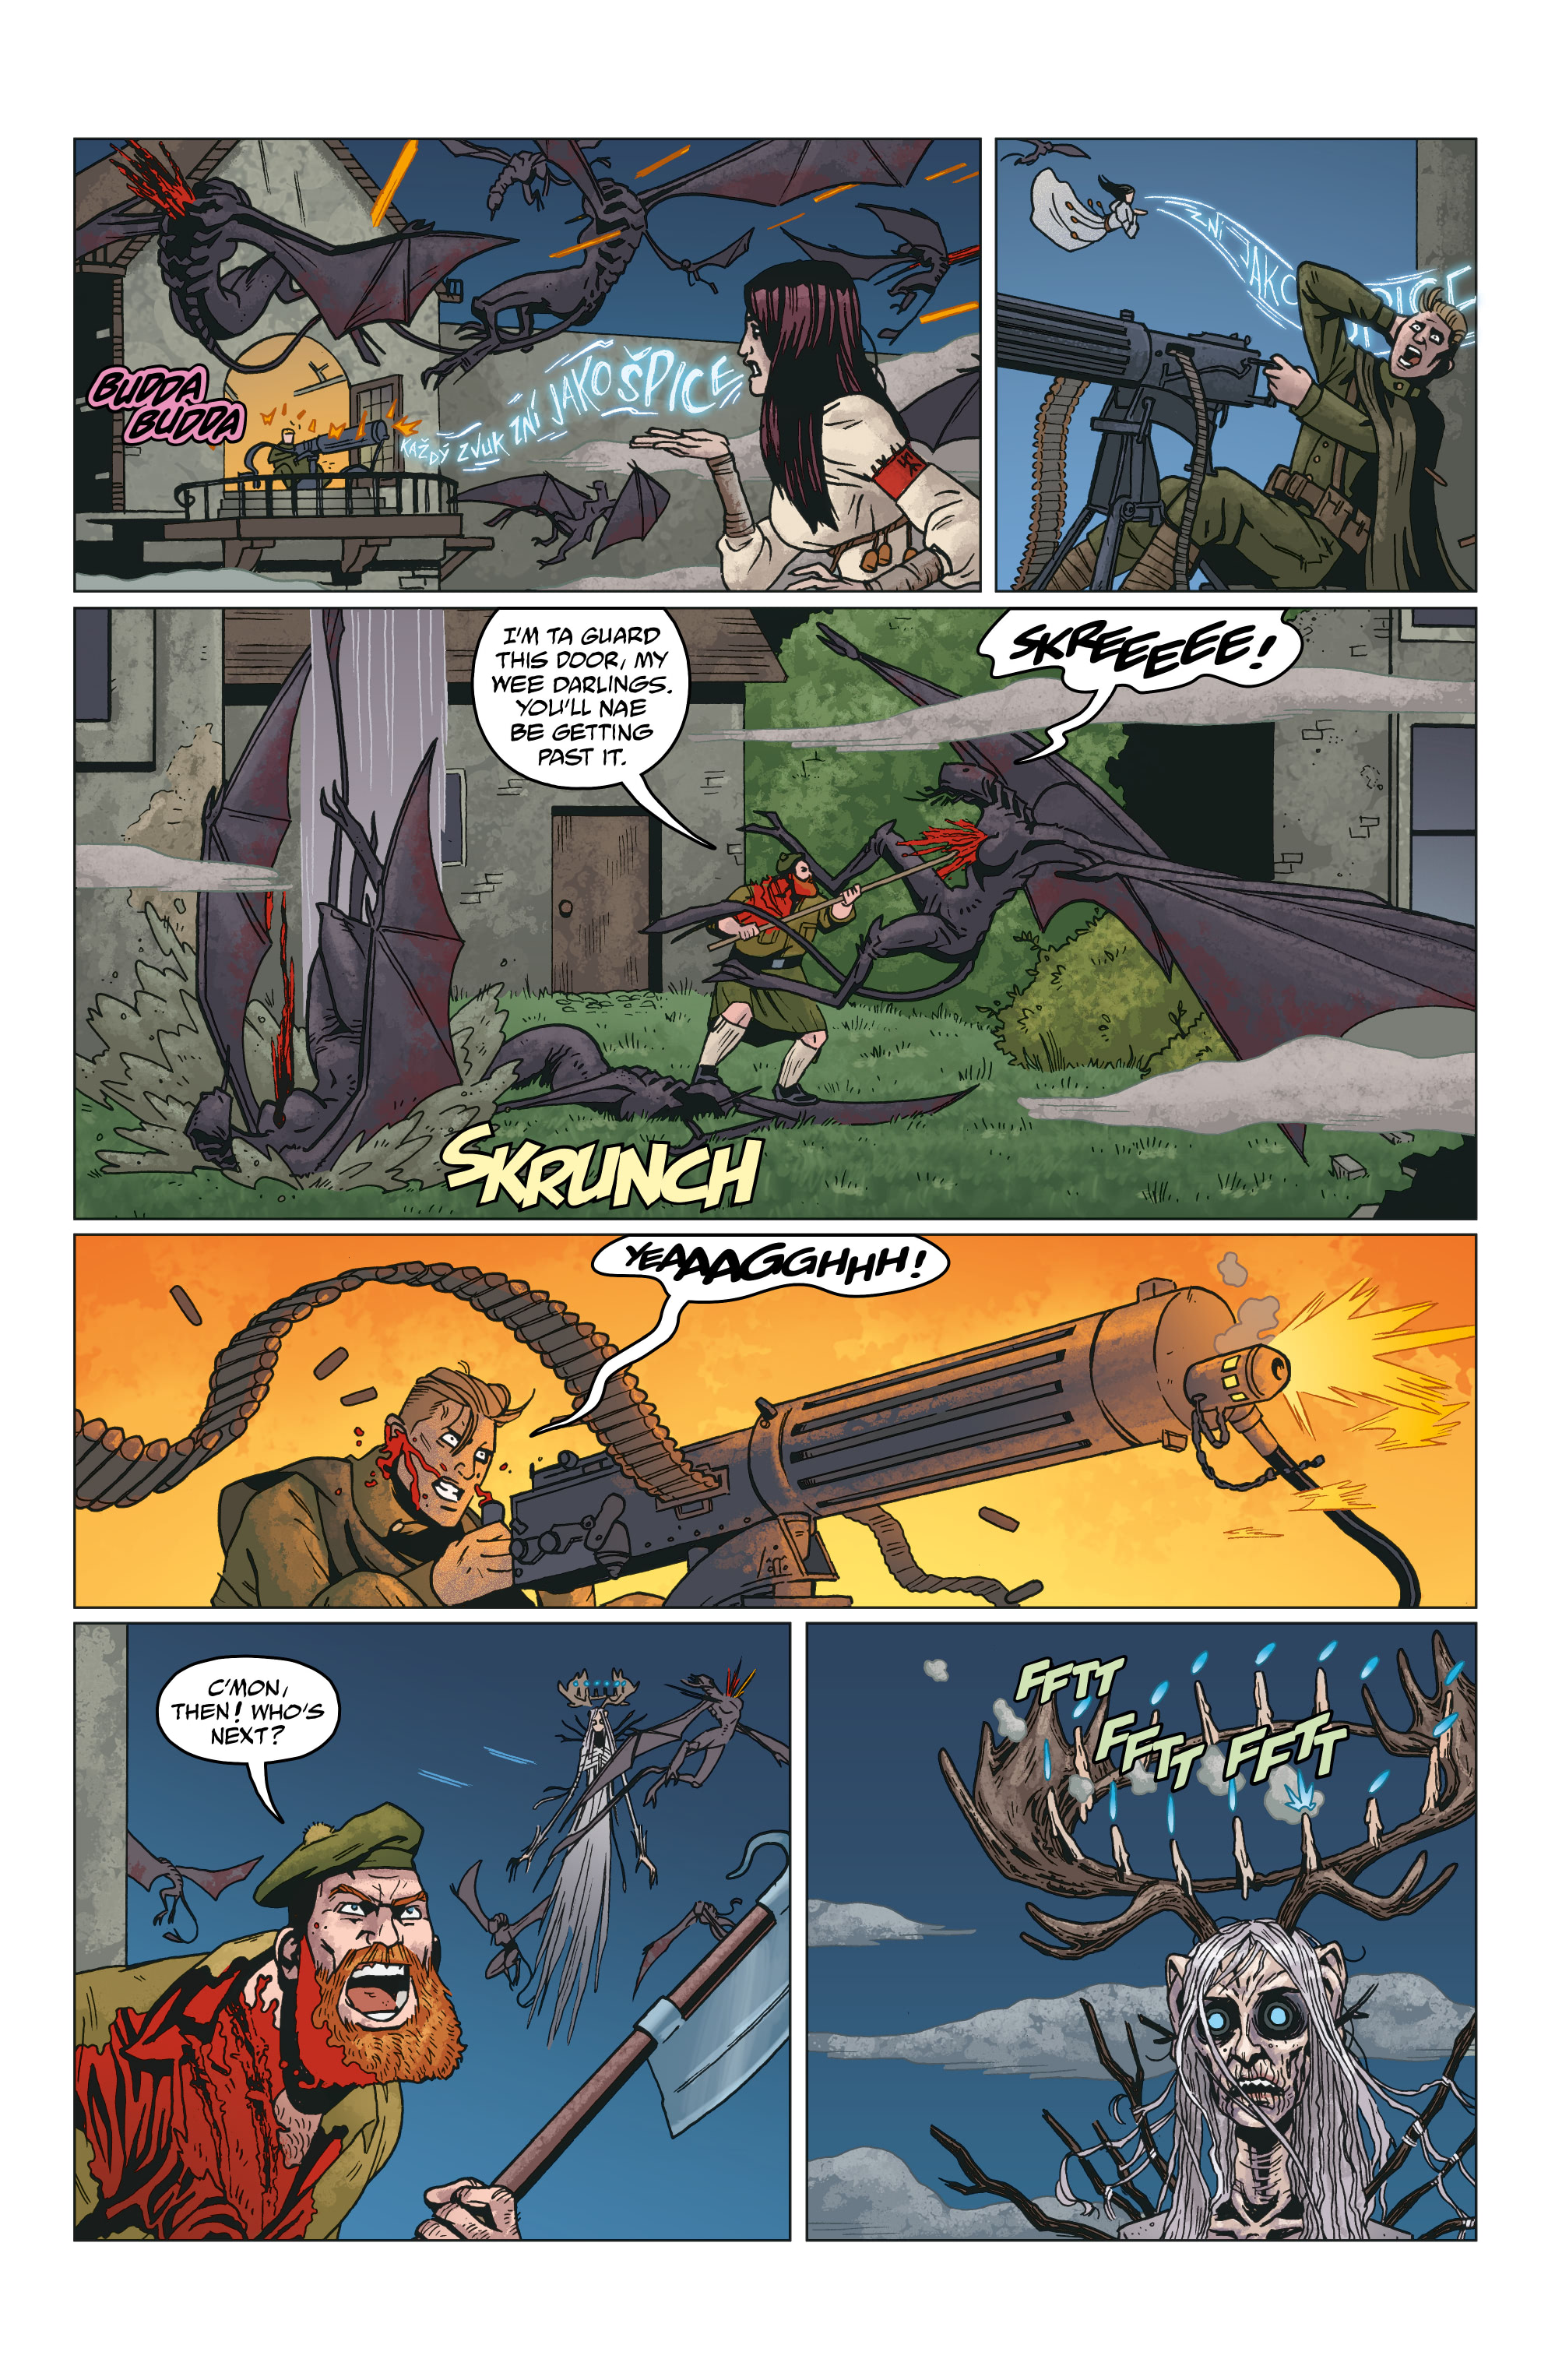 Lady Baltimore: The Witch Queens (2021-): Chapter 2 - Page 4